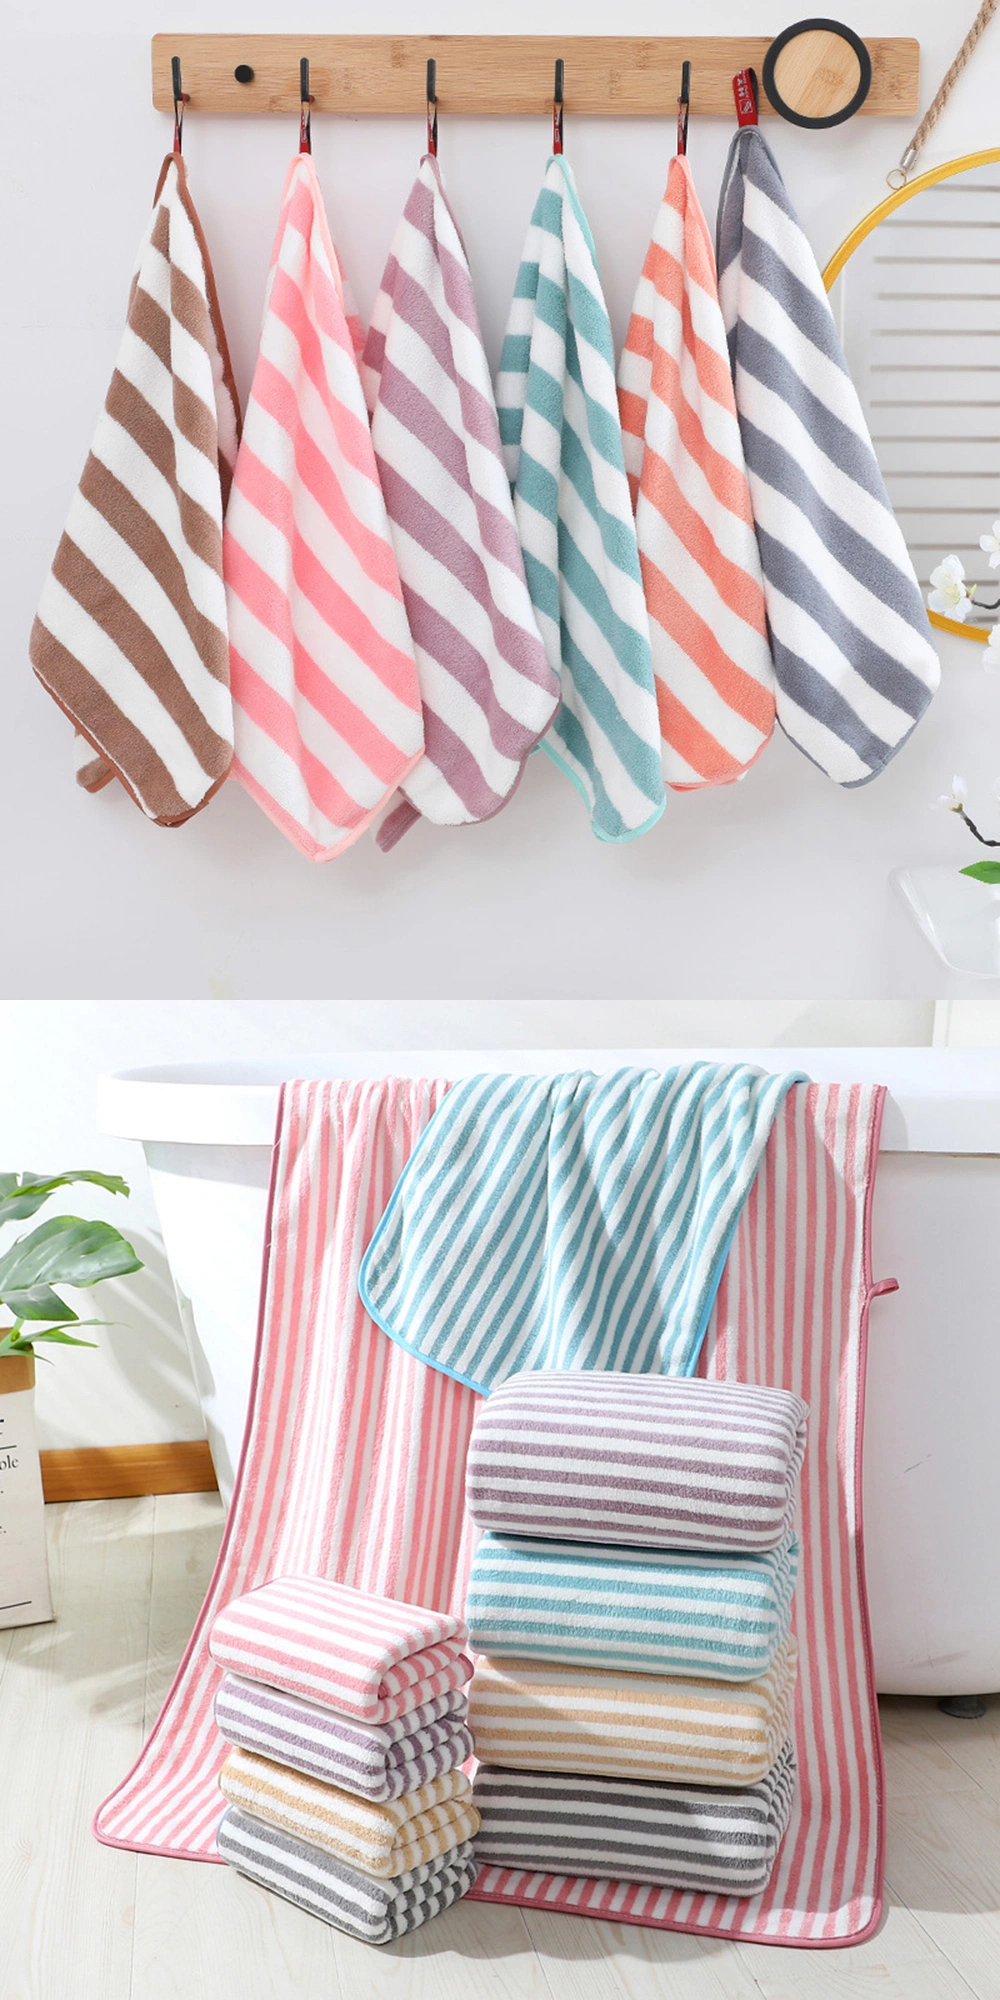 Antimicrobial Coral Fleece Fiber Absorbent Anti Bacterial Striped Bath Face Towel